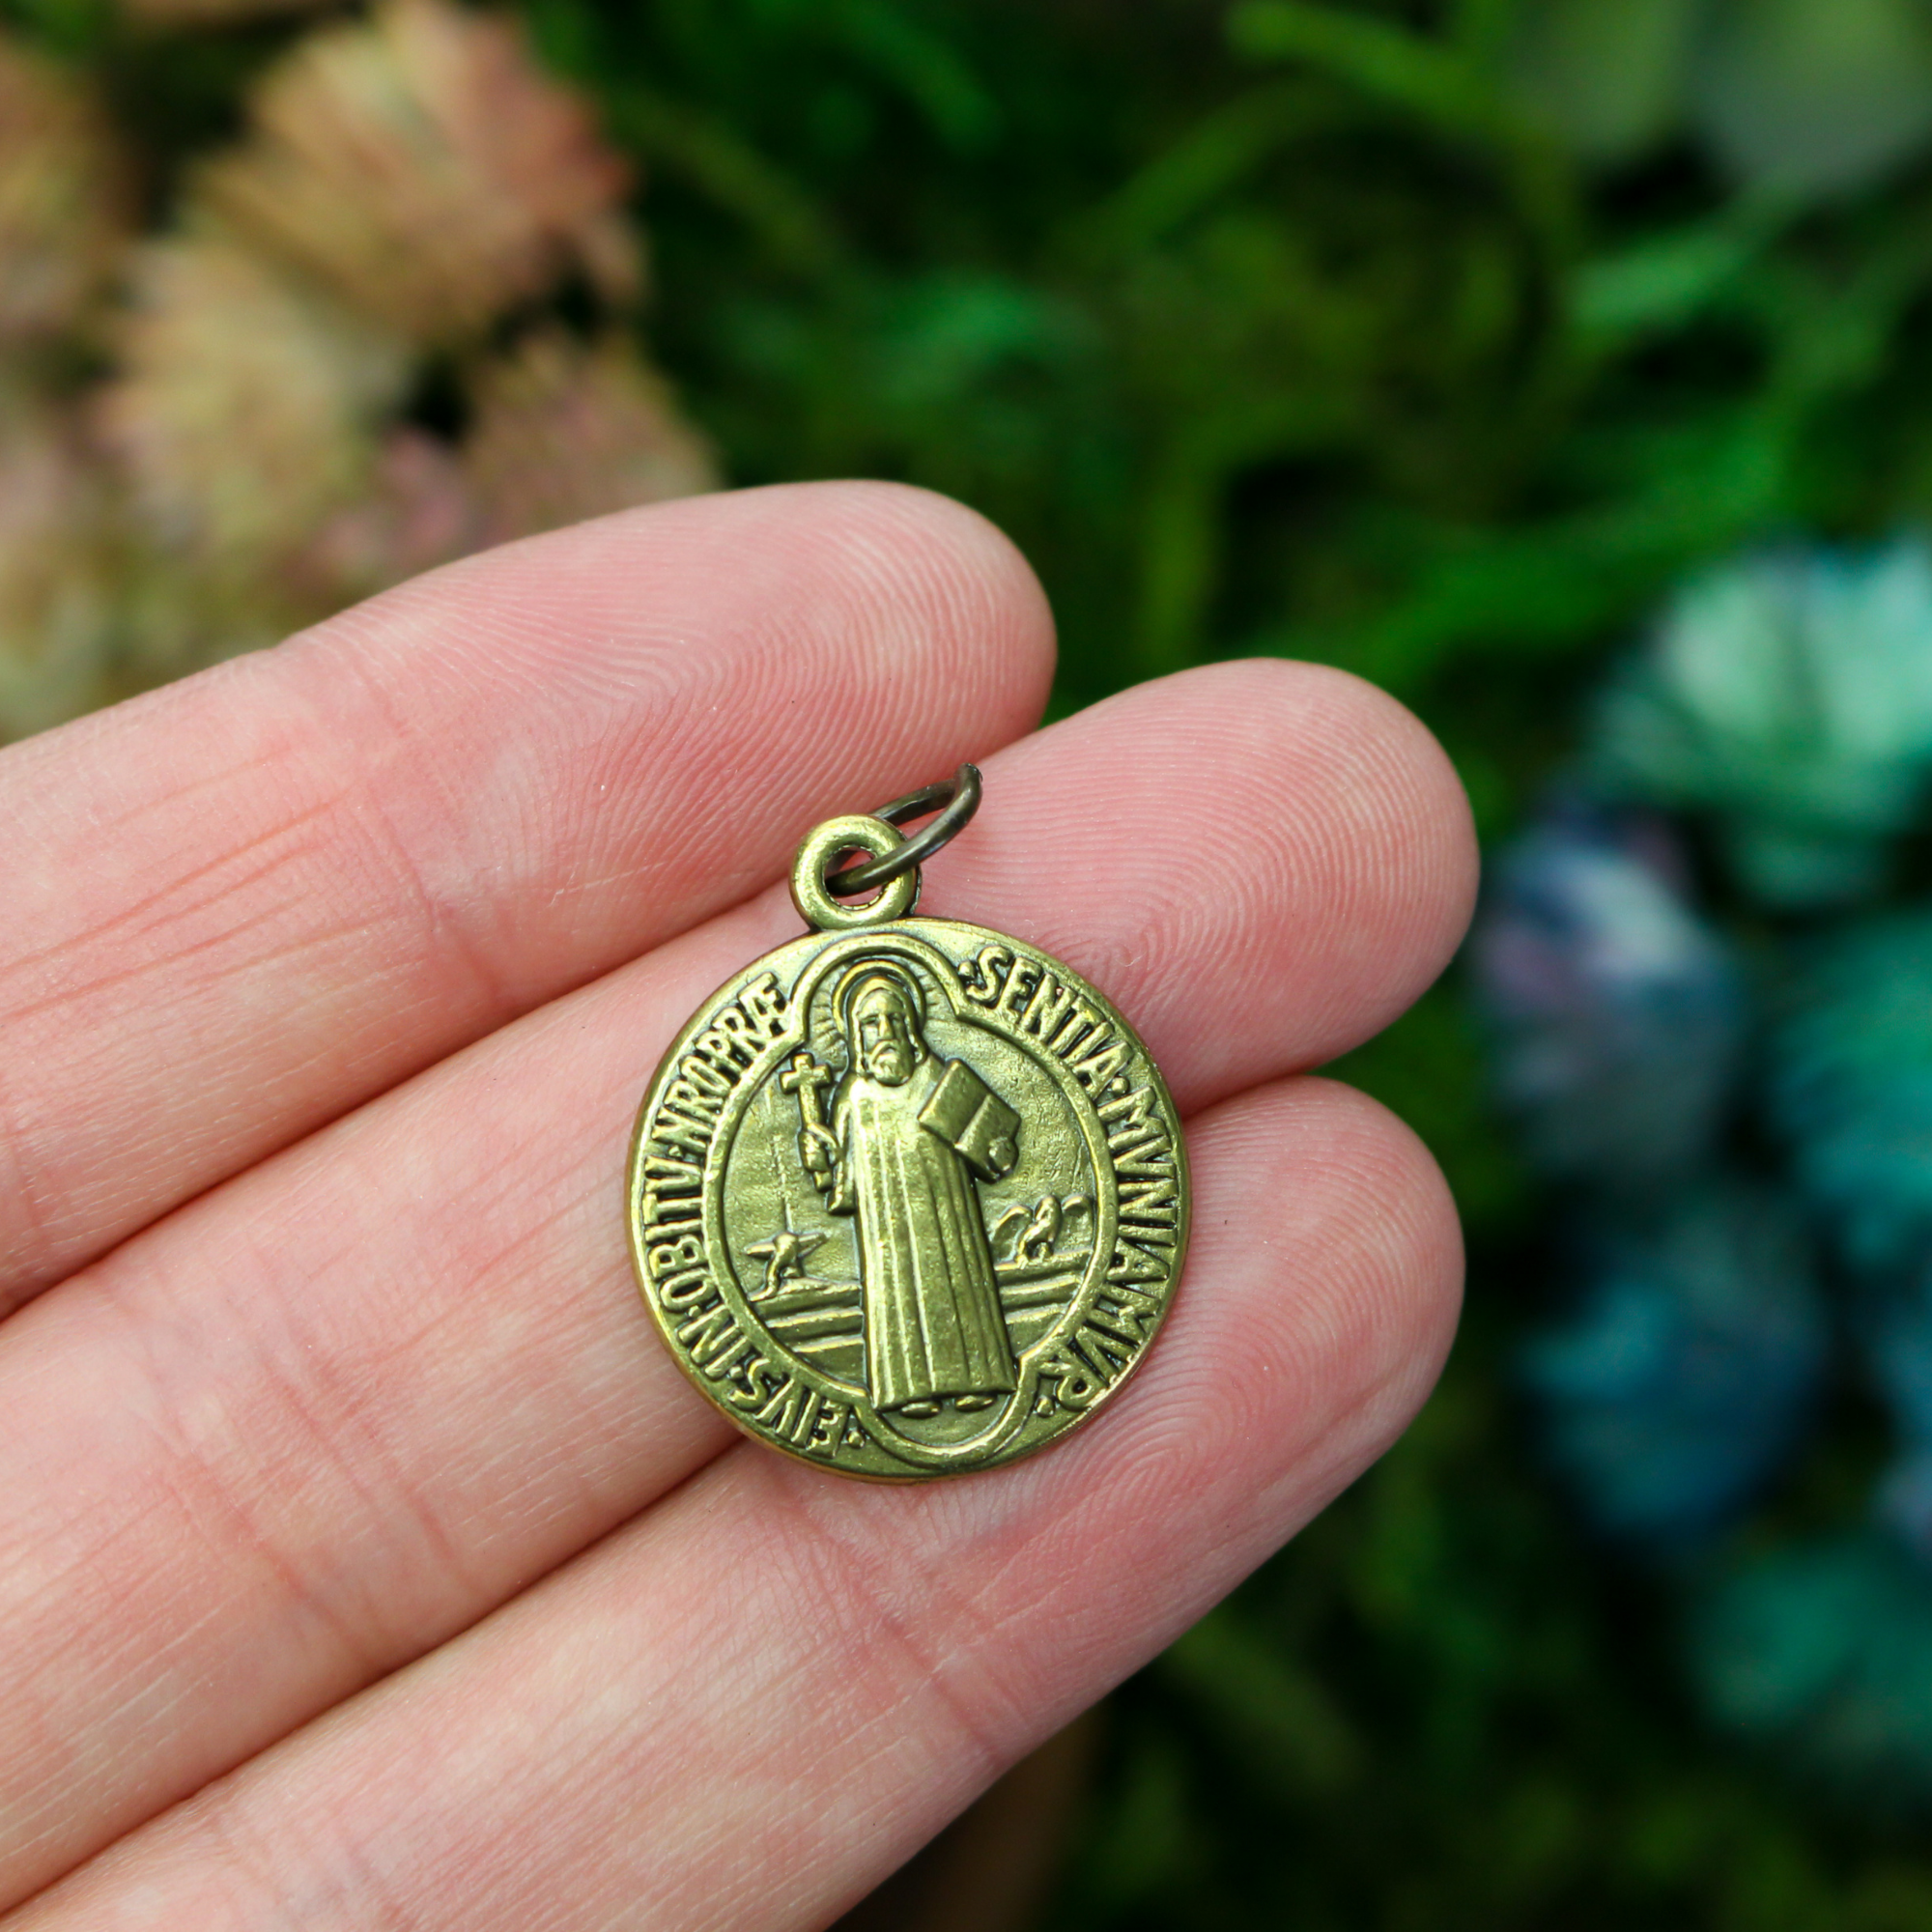 Saint Benedict protection medal that is bronze-tone in color 19mm